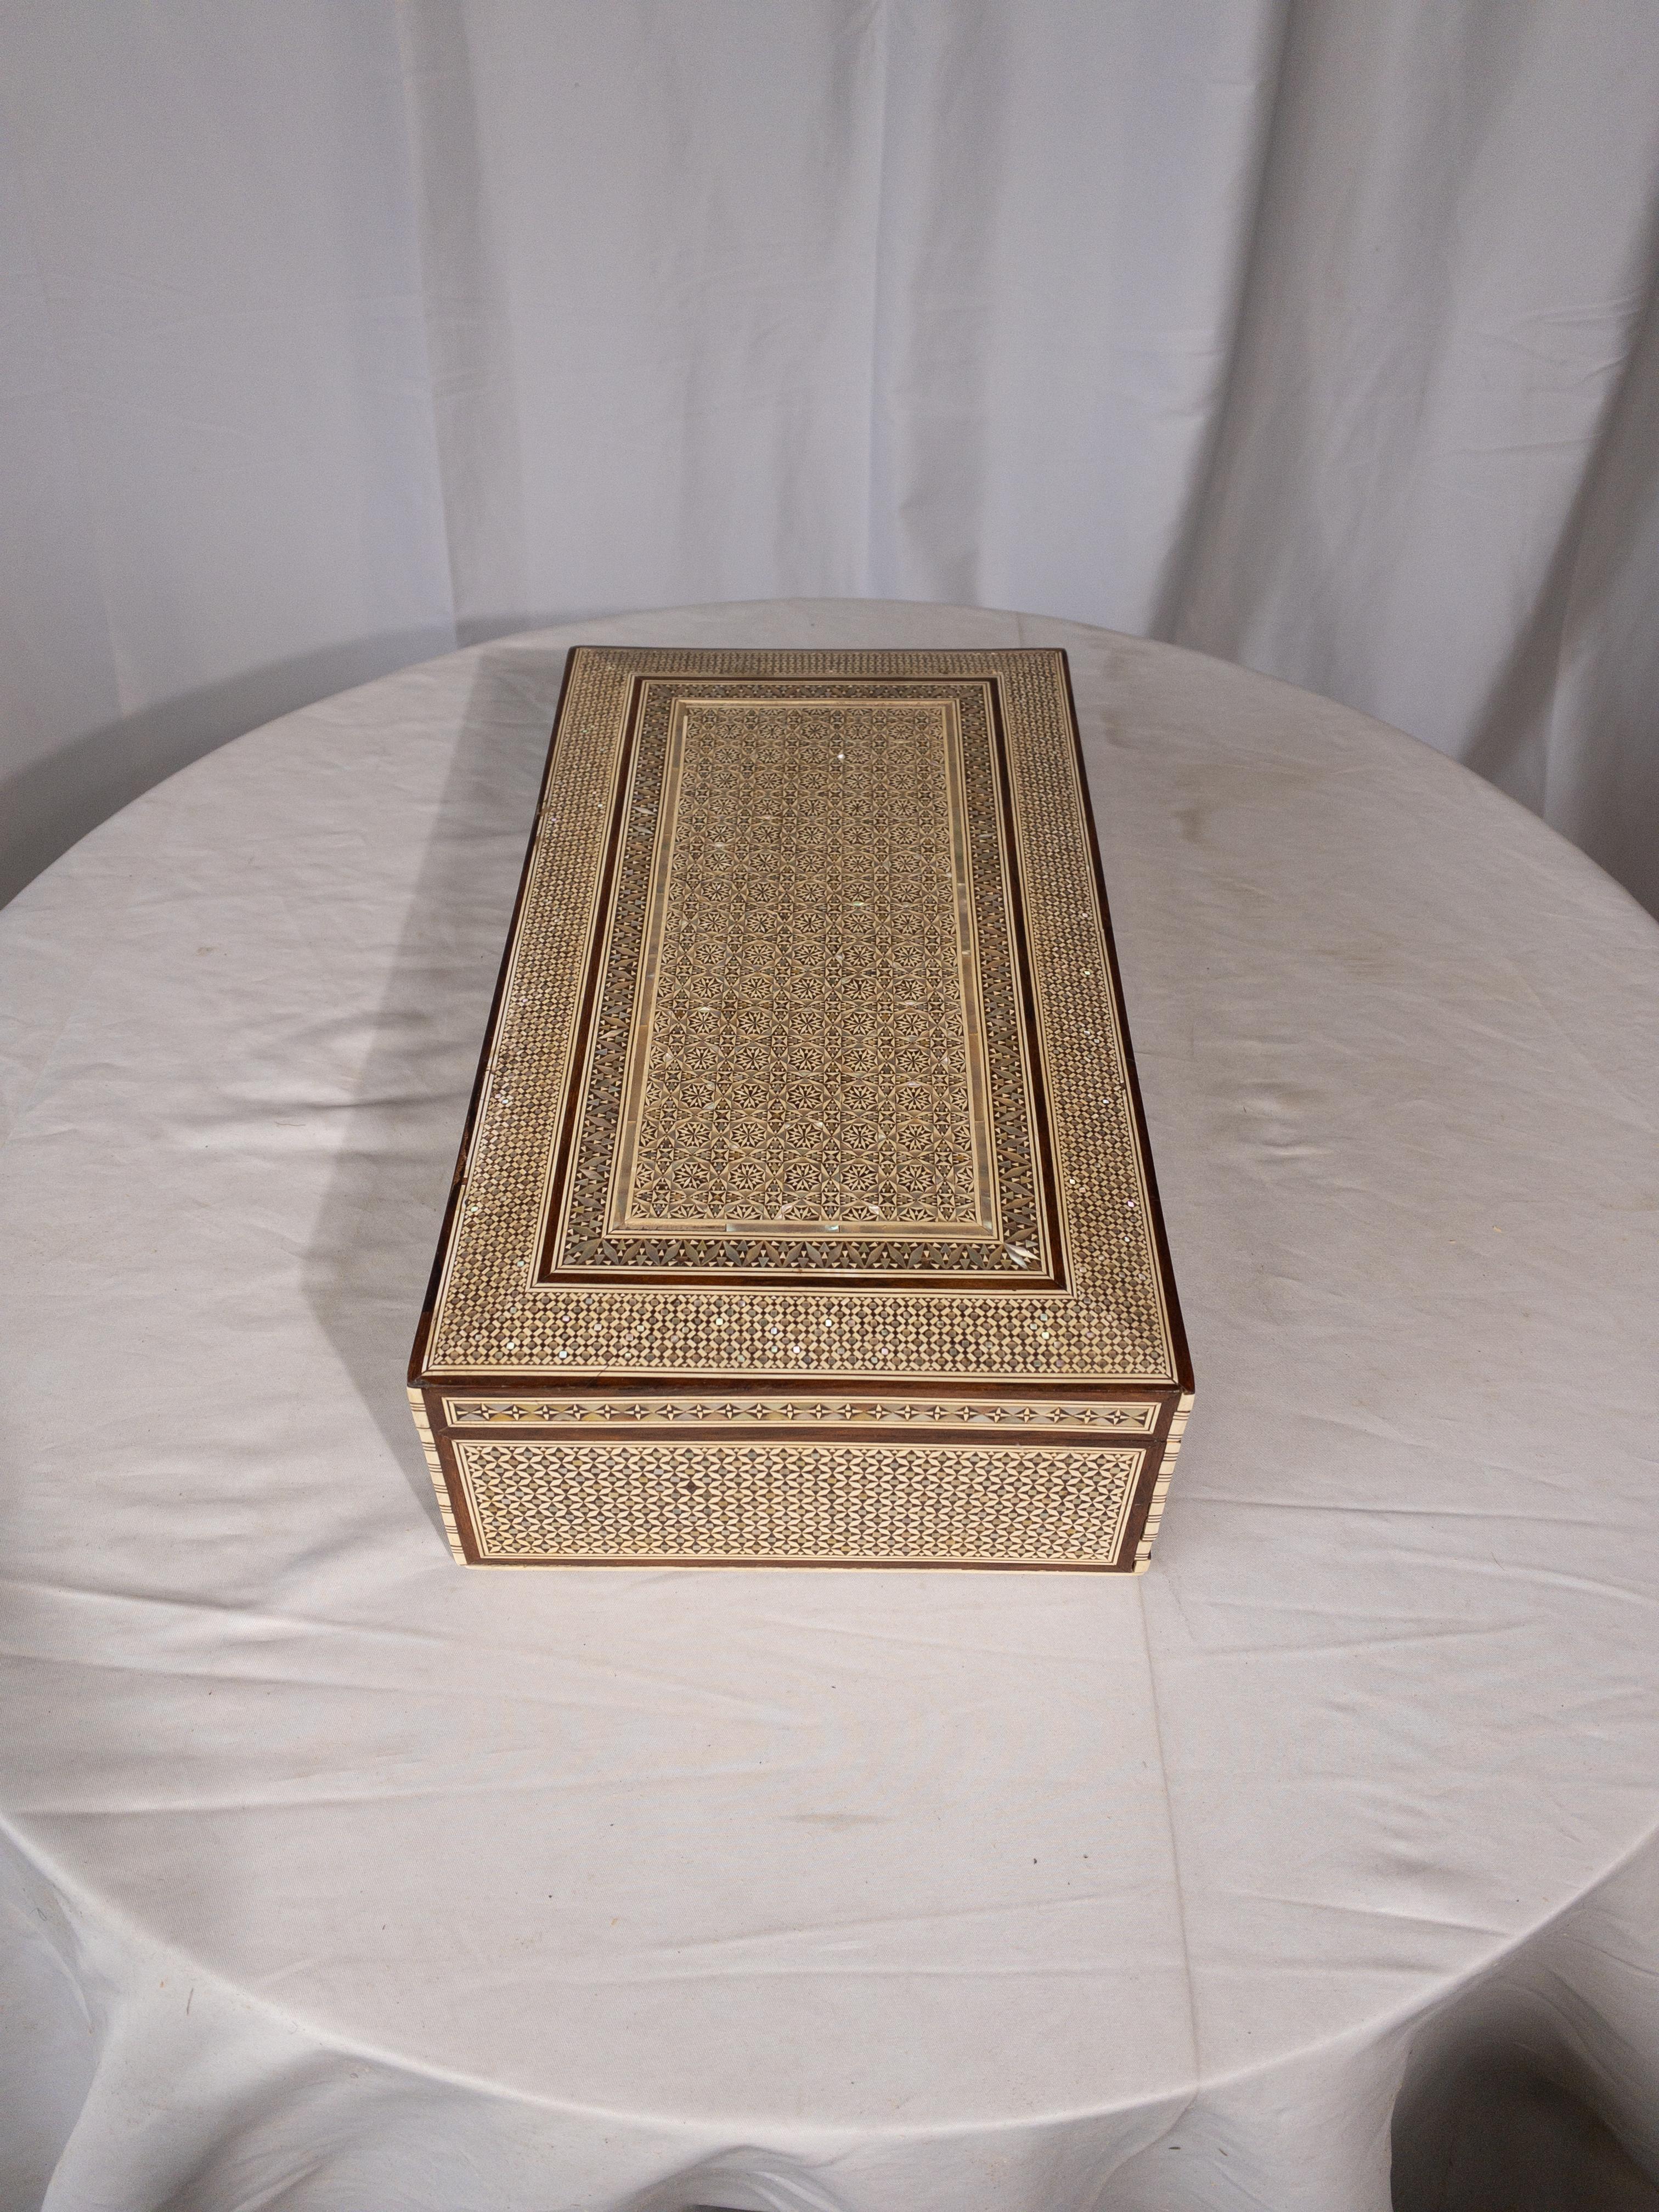 1920’s French Inlaid Anglo-Indian Style Jewelry Box In Good Condition For Sale In Houston, TX